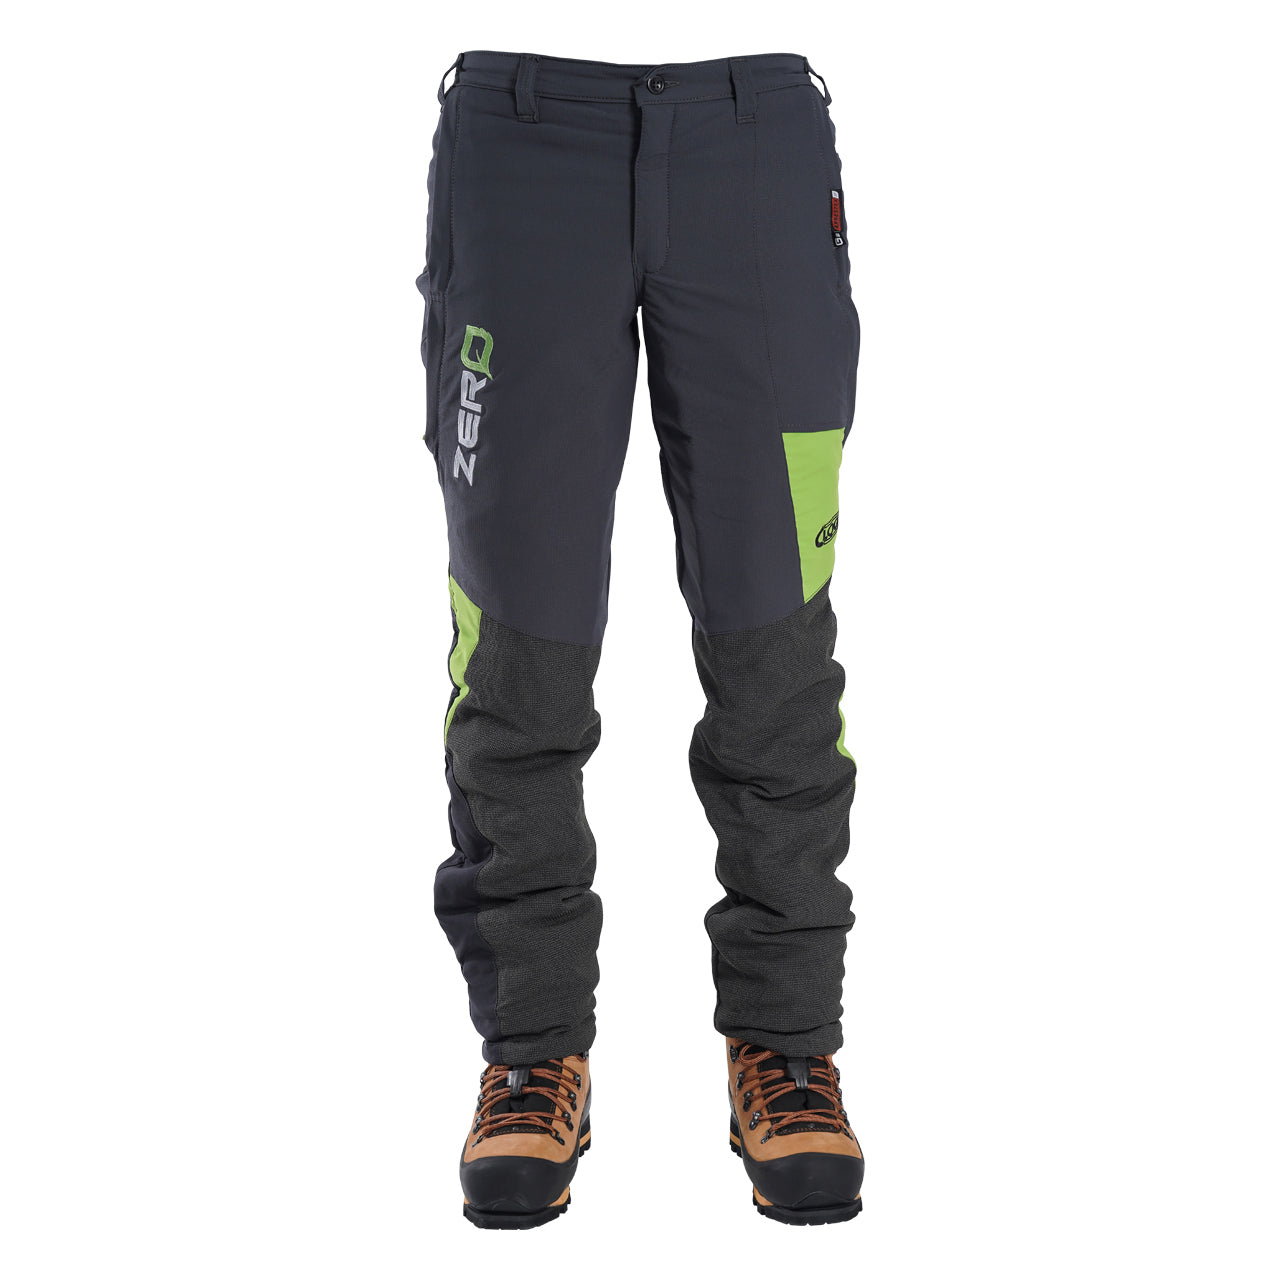 Clogger Zero Gen2 Light and Cool Men's Chainsaw Trousers - Grey/Green ...